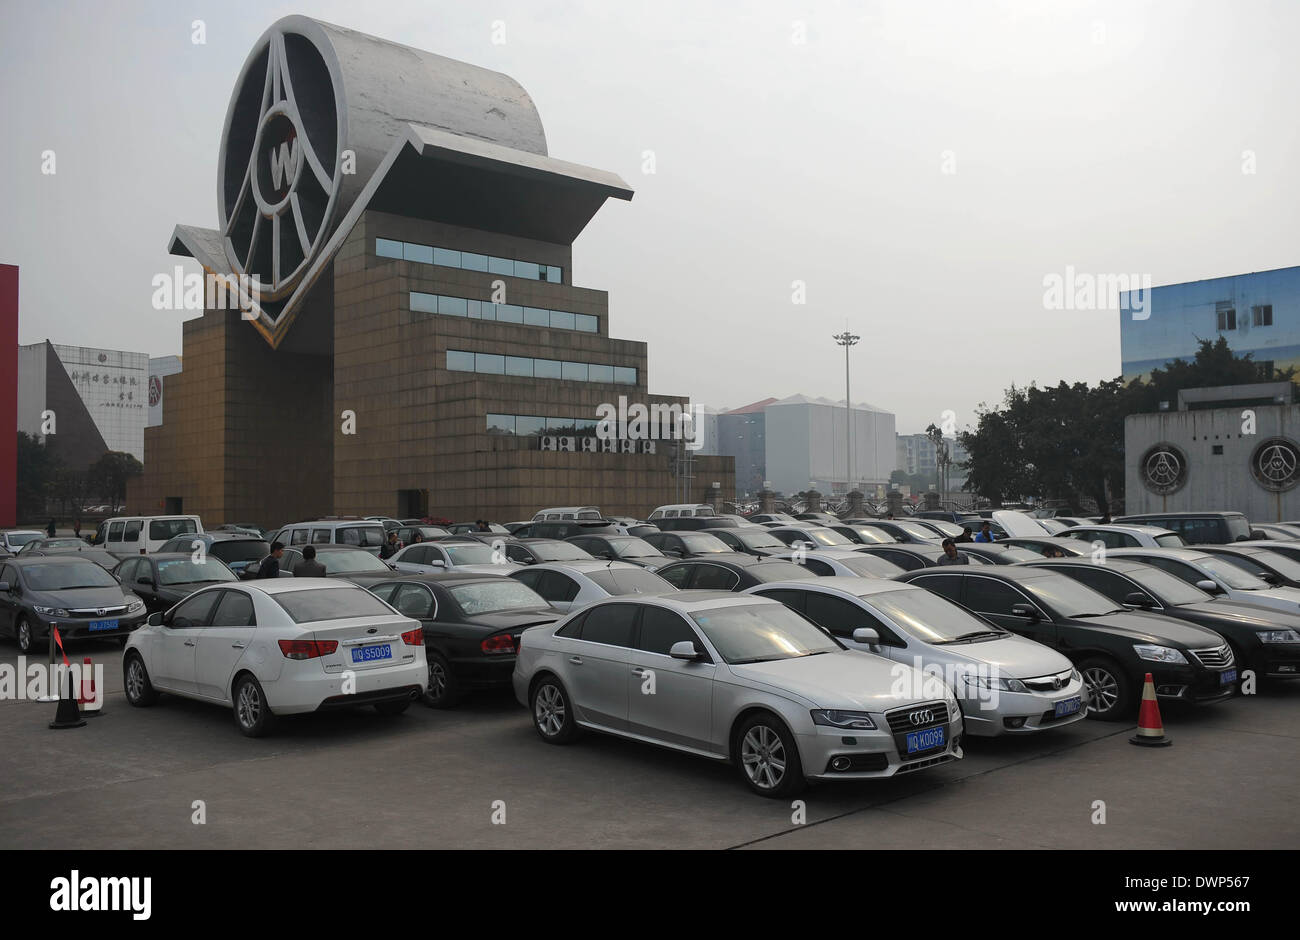 Yibin. 12th Mar, 2014. Photo taken on March 12, 2014 shows the official cars to be auctioned in Yibin City, southwest China's Sichuan Province. The three-day second tour of auction for official cars was held on Wednesday, which will auction 256 official cars belonging to Wuliangye Group as part of the anti-corruption drive to curb official car abuse. © Xue Yubin/Xinhua/Alamy Live News Stock Photo